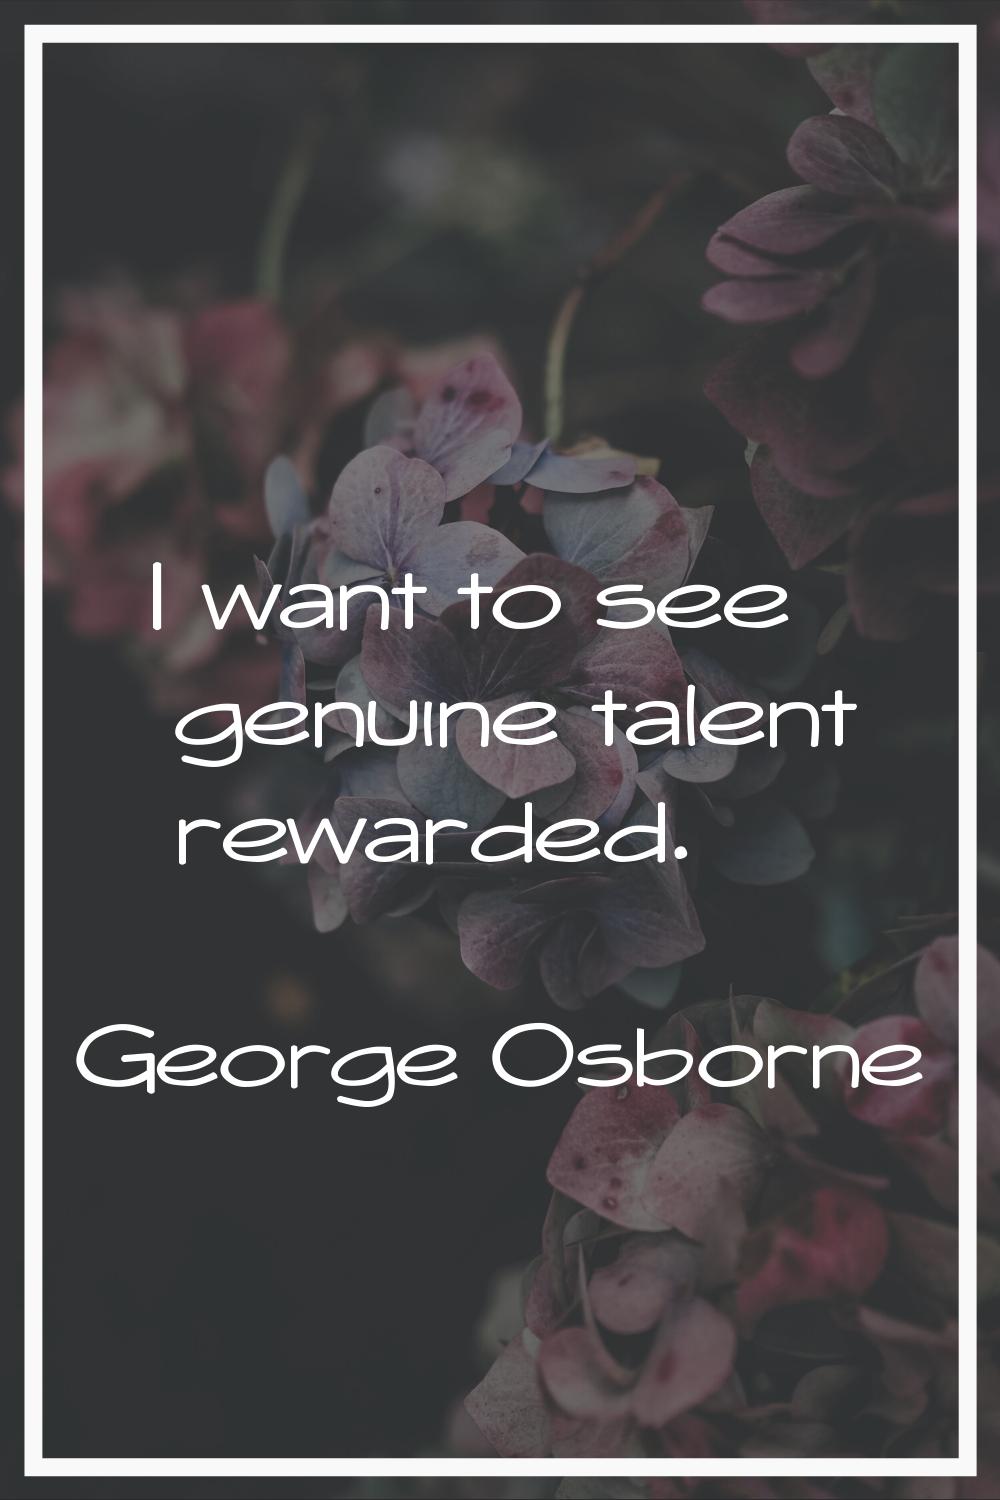 I want to see genuine talent rewarded.